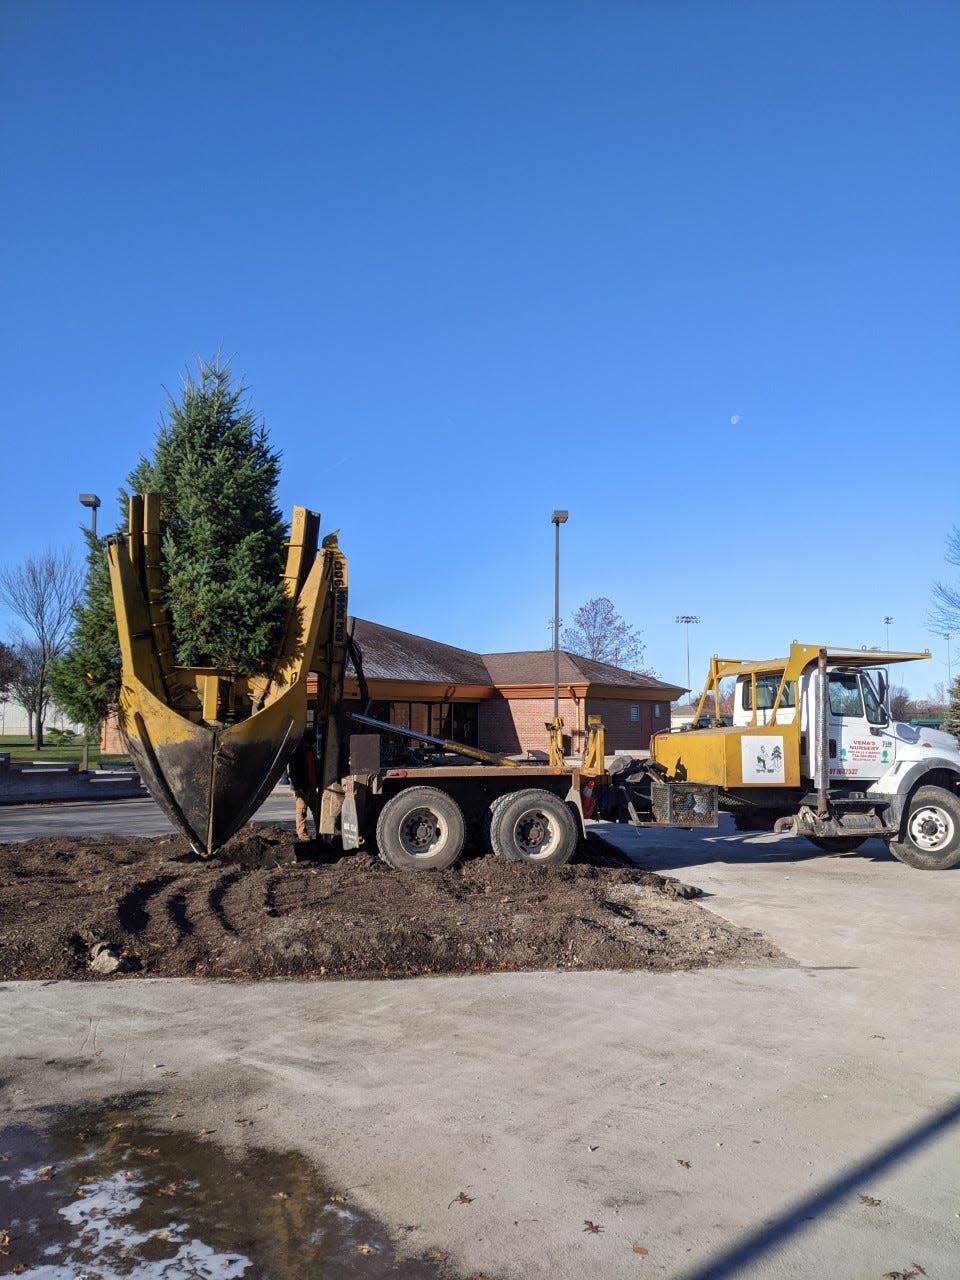 Vena's Nursery used a giant clamp to move a donated tree Tuesday morning from Seneca and Ypsilanti Sts. in Flat Rock to Community Park (above) where it was transplanted into the ground on the site of a former ice-skating rink and fountain.